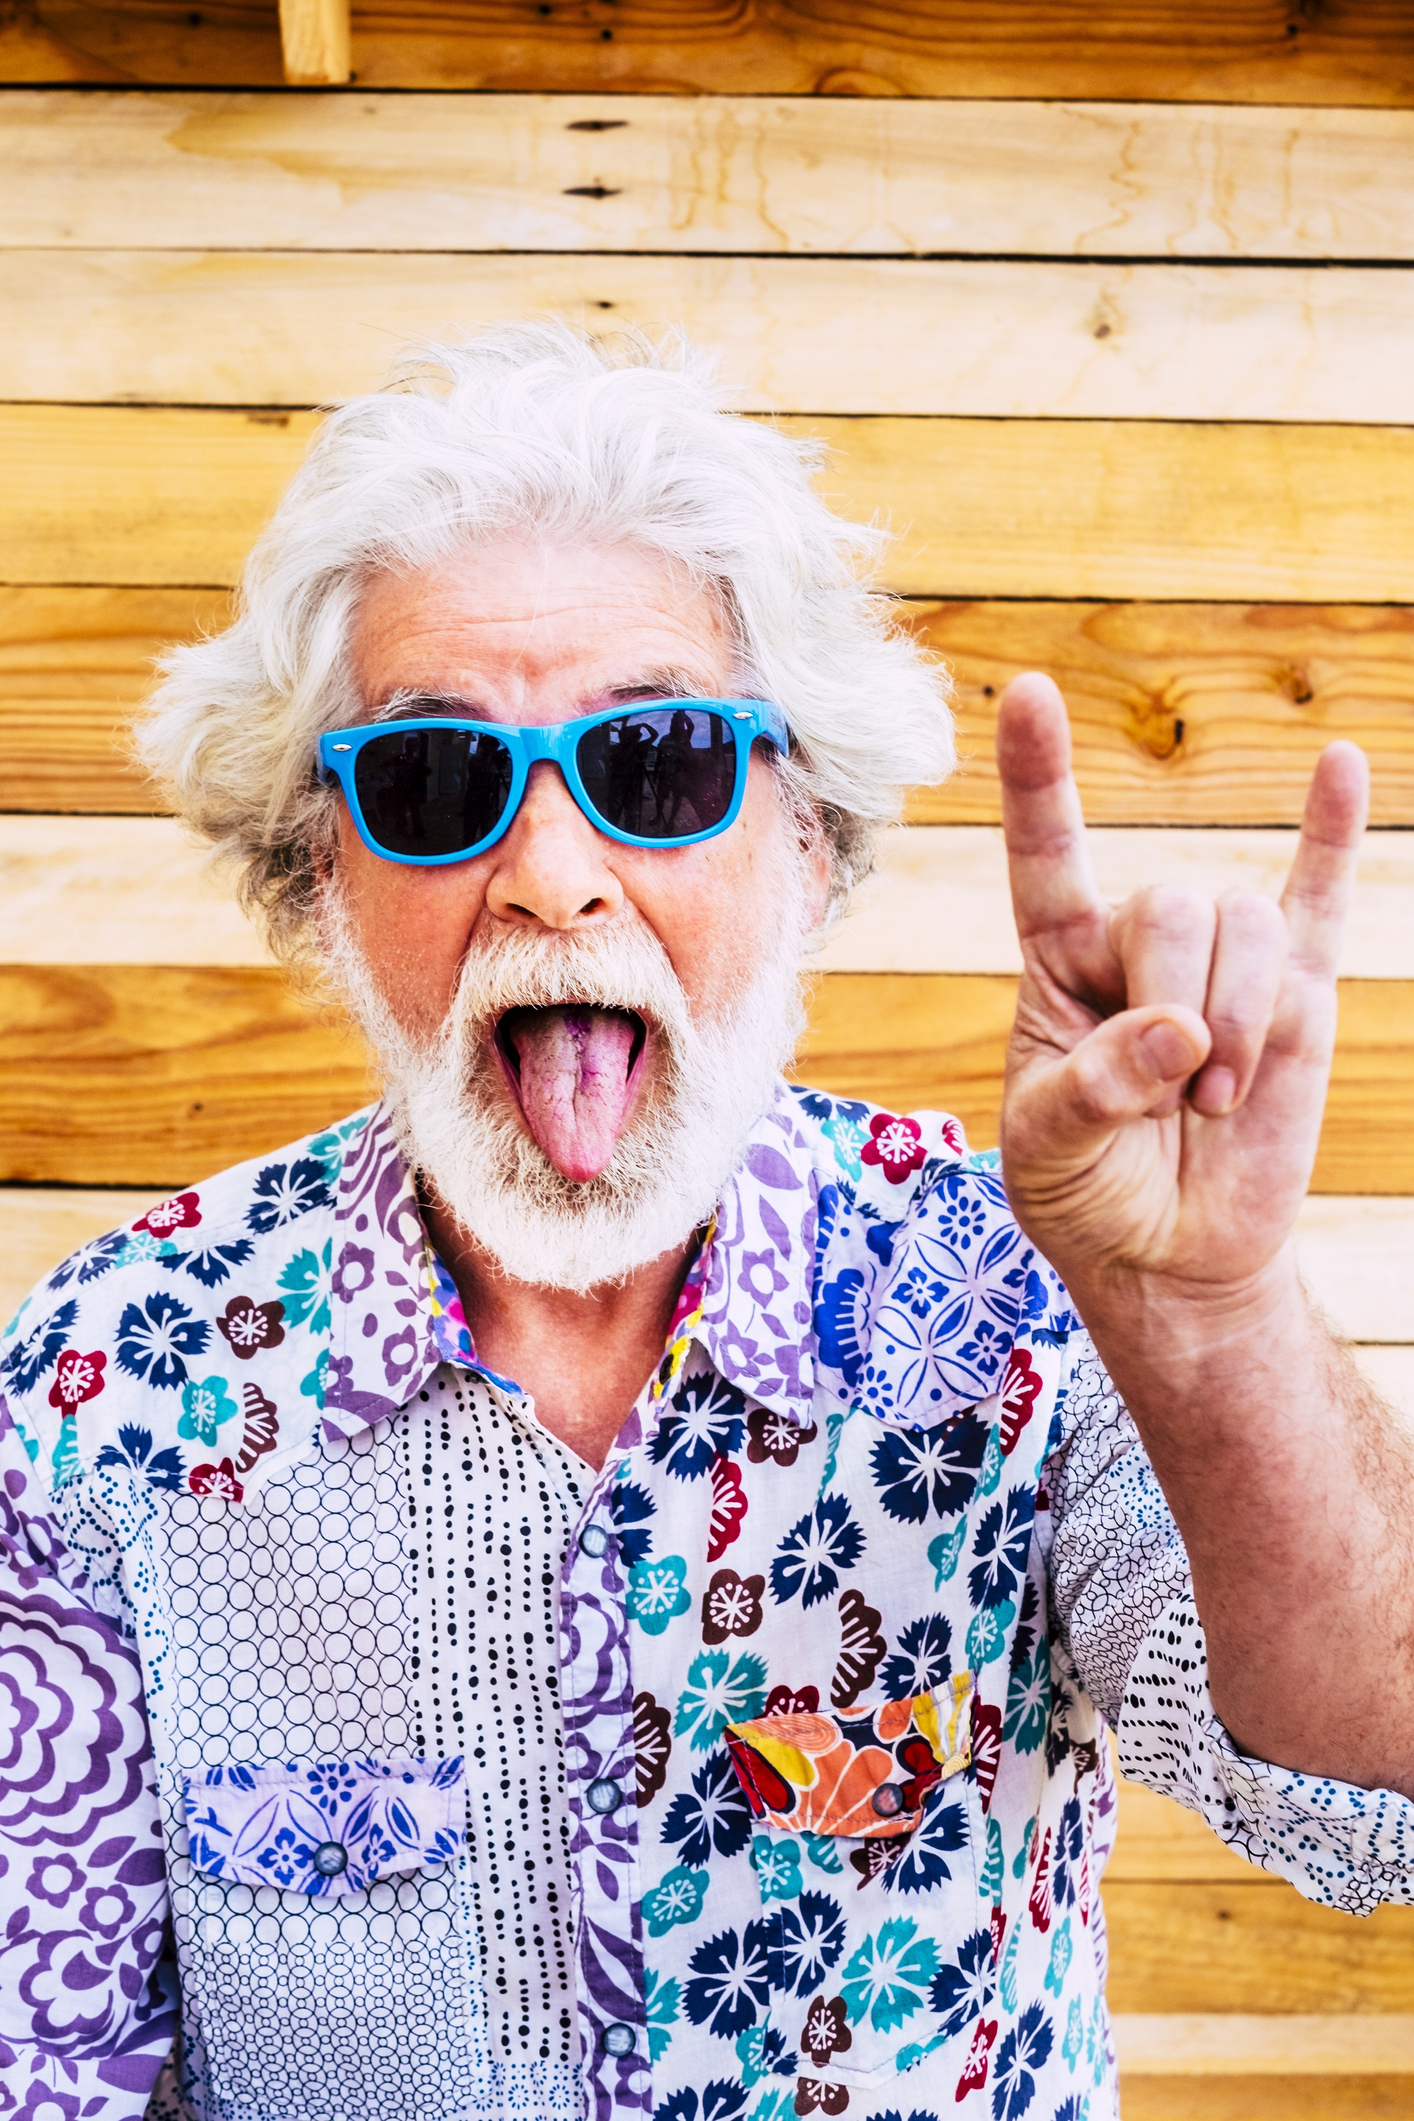 Senior man making funny expression and gesturing against wooden wall. Portrait of elderly man in funky shirt and sunglasses. Old man gesturing with hands and making humorous face